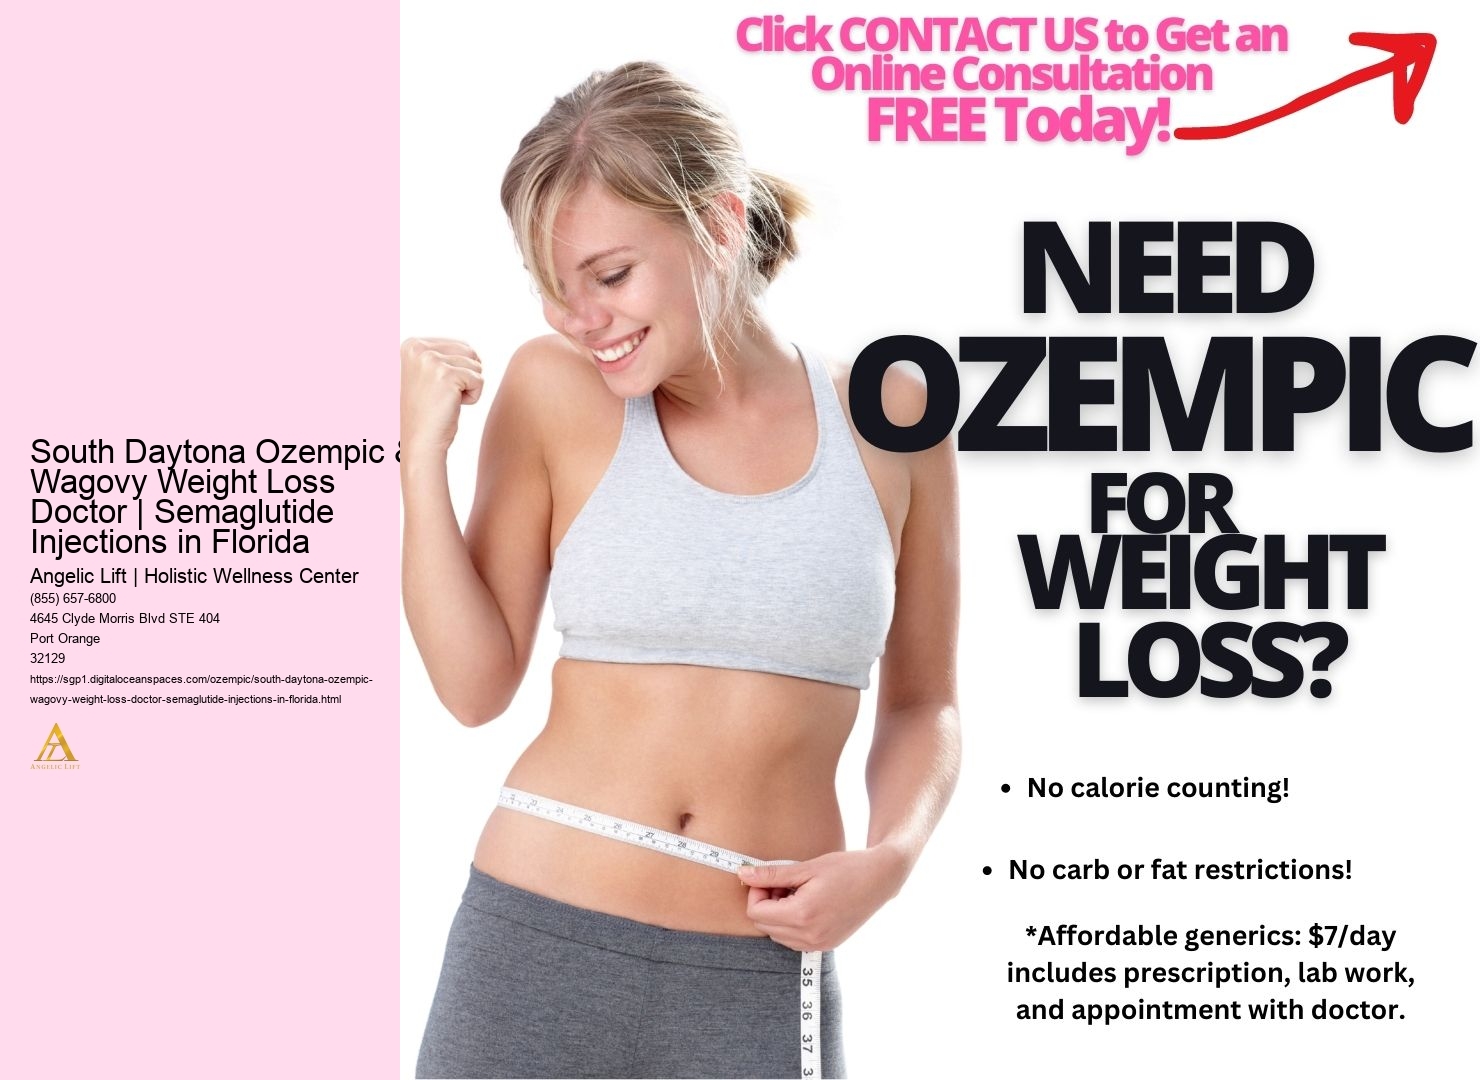 South Daytona Ozempic & Wagovy Weight Loss Doctor | Semaglutide Injections in Florida